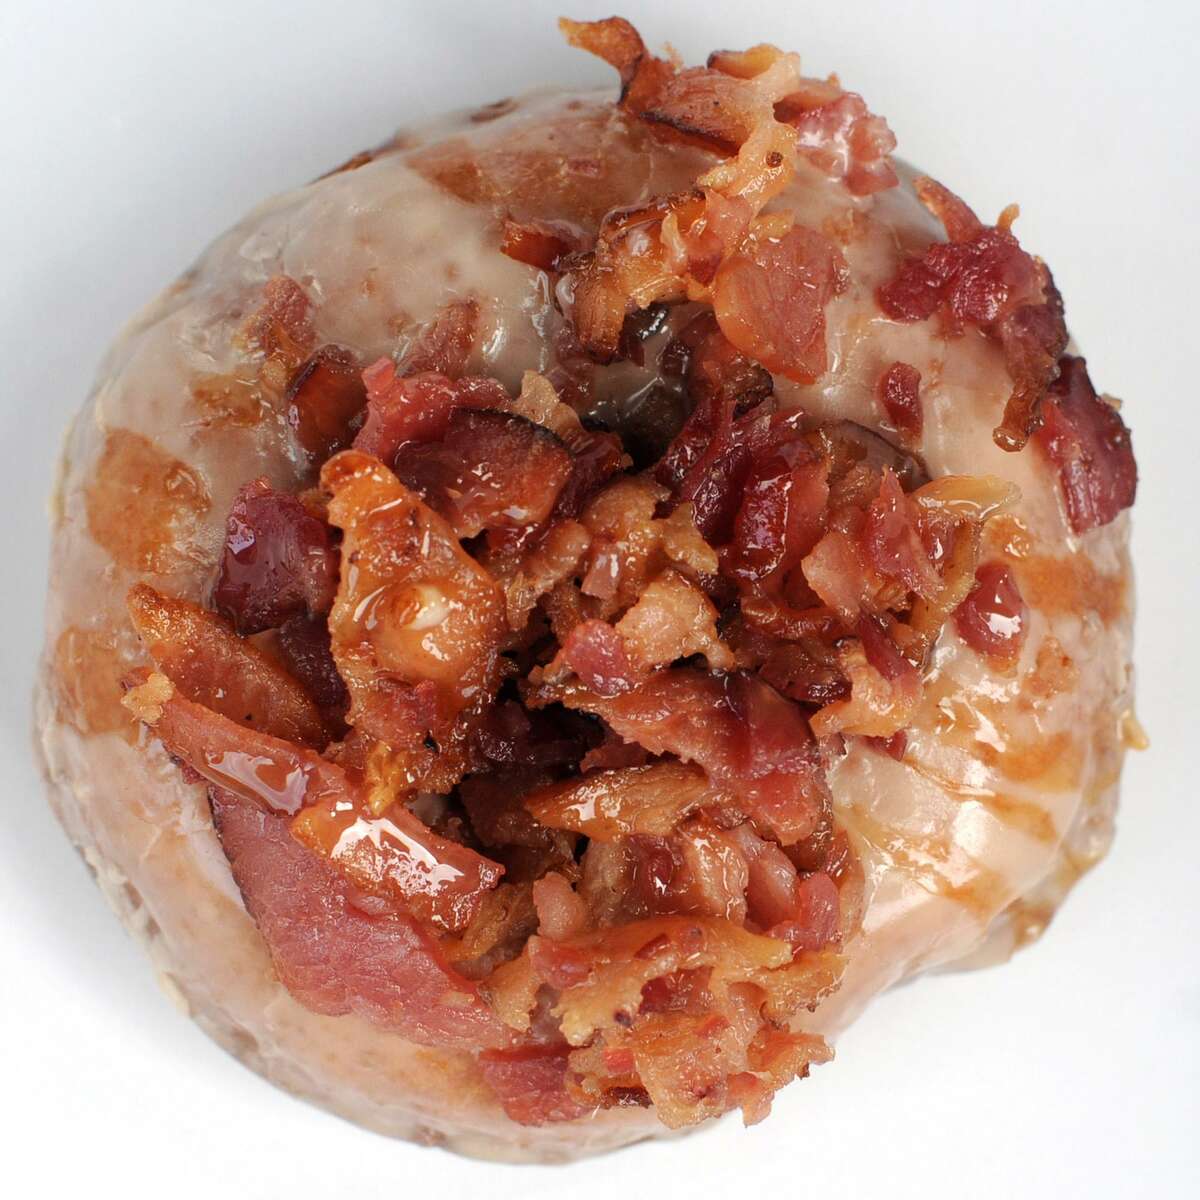 Bacon in the SunWhere to find it: Duck Donuts, 11703 Huebner Road, Suite 113, 210-476-5500, duckdonuts.com, Facebook: Duck Donuts (San Antonio, TX) Why we love it: Chopped bacon, salted caramel drizzle, maple icing. Pile that on a piping hot, spot fried cake doughnuts, and you have a treat that smells like the best short-order diner in town.